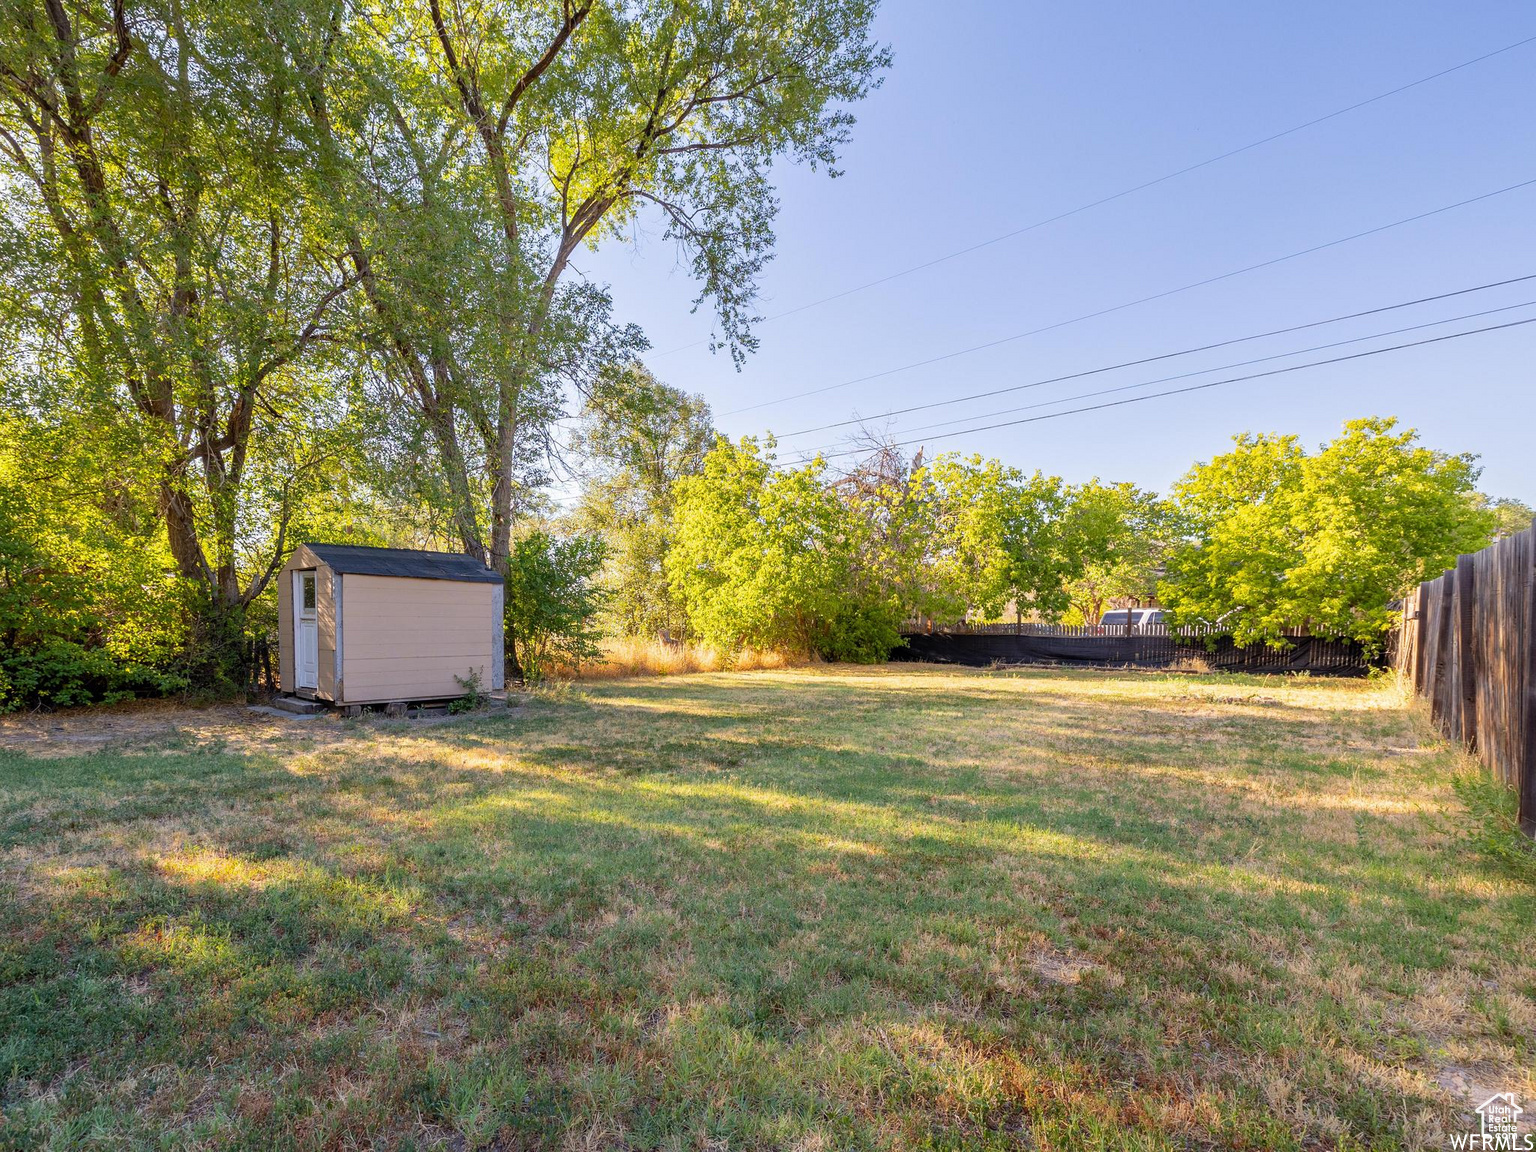 Fully fenced, large yard with storage shed